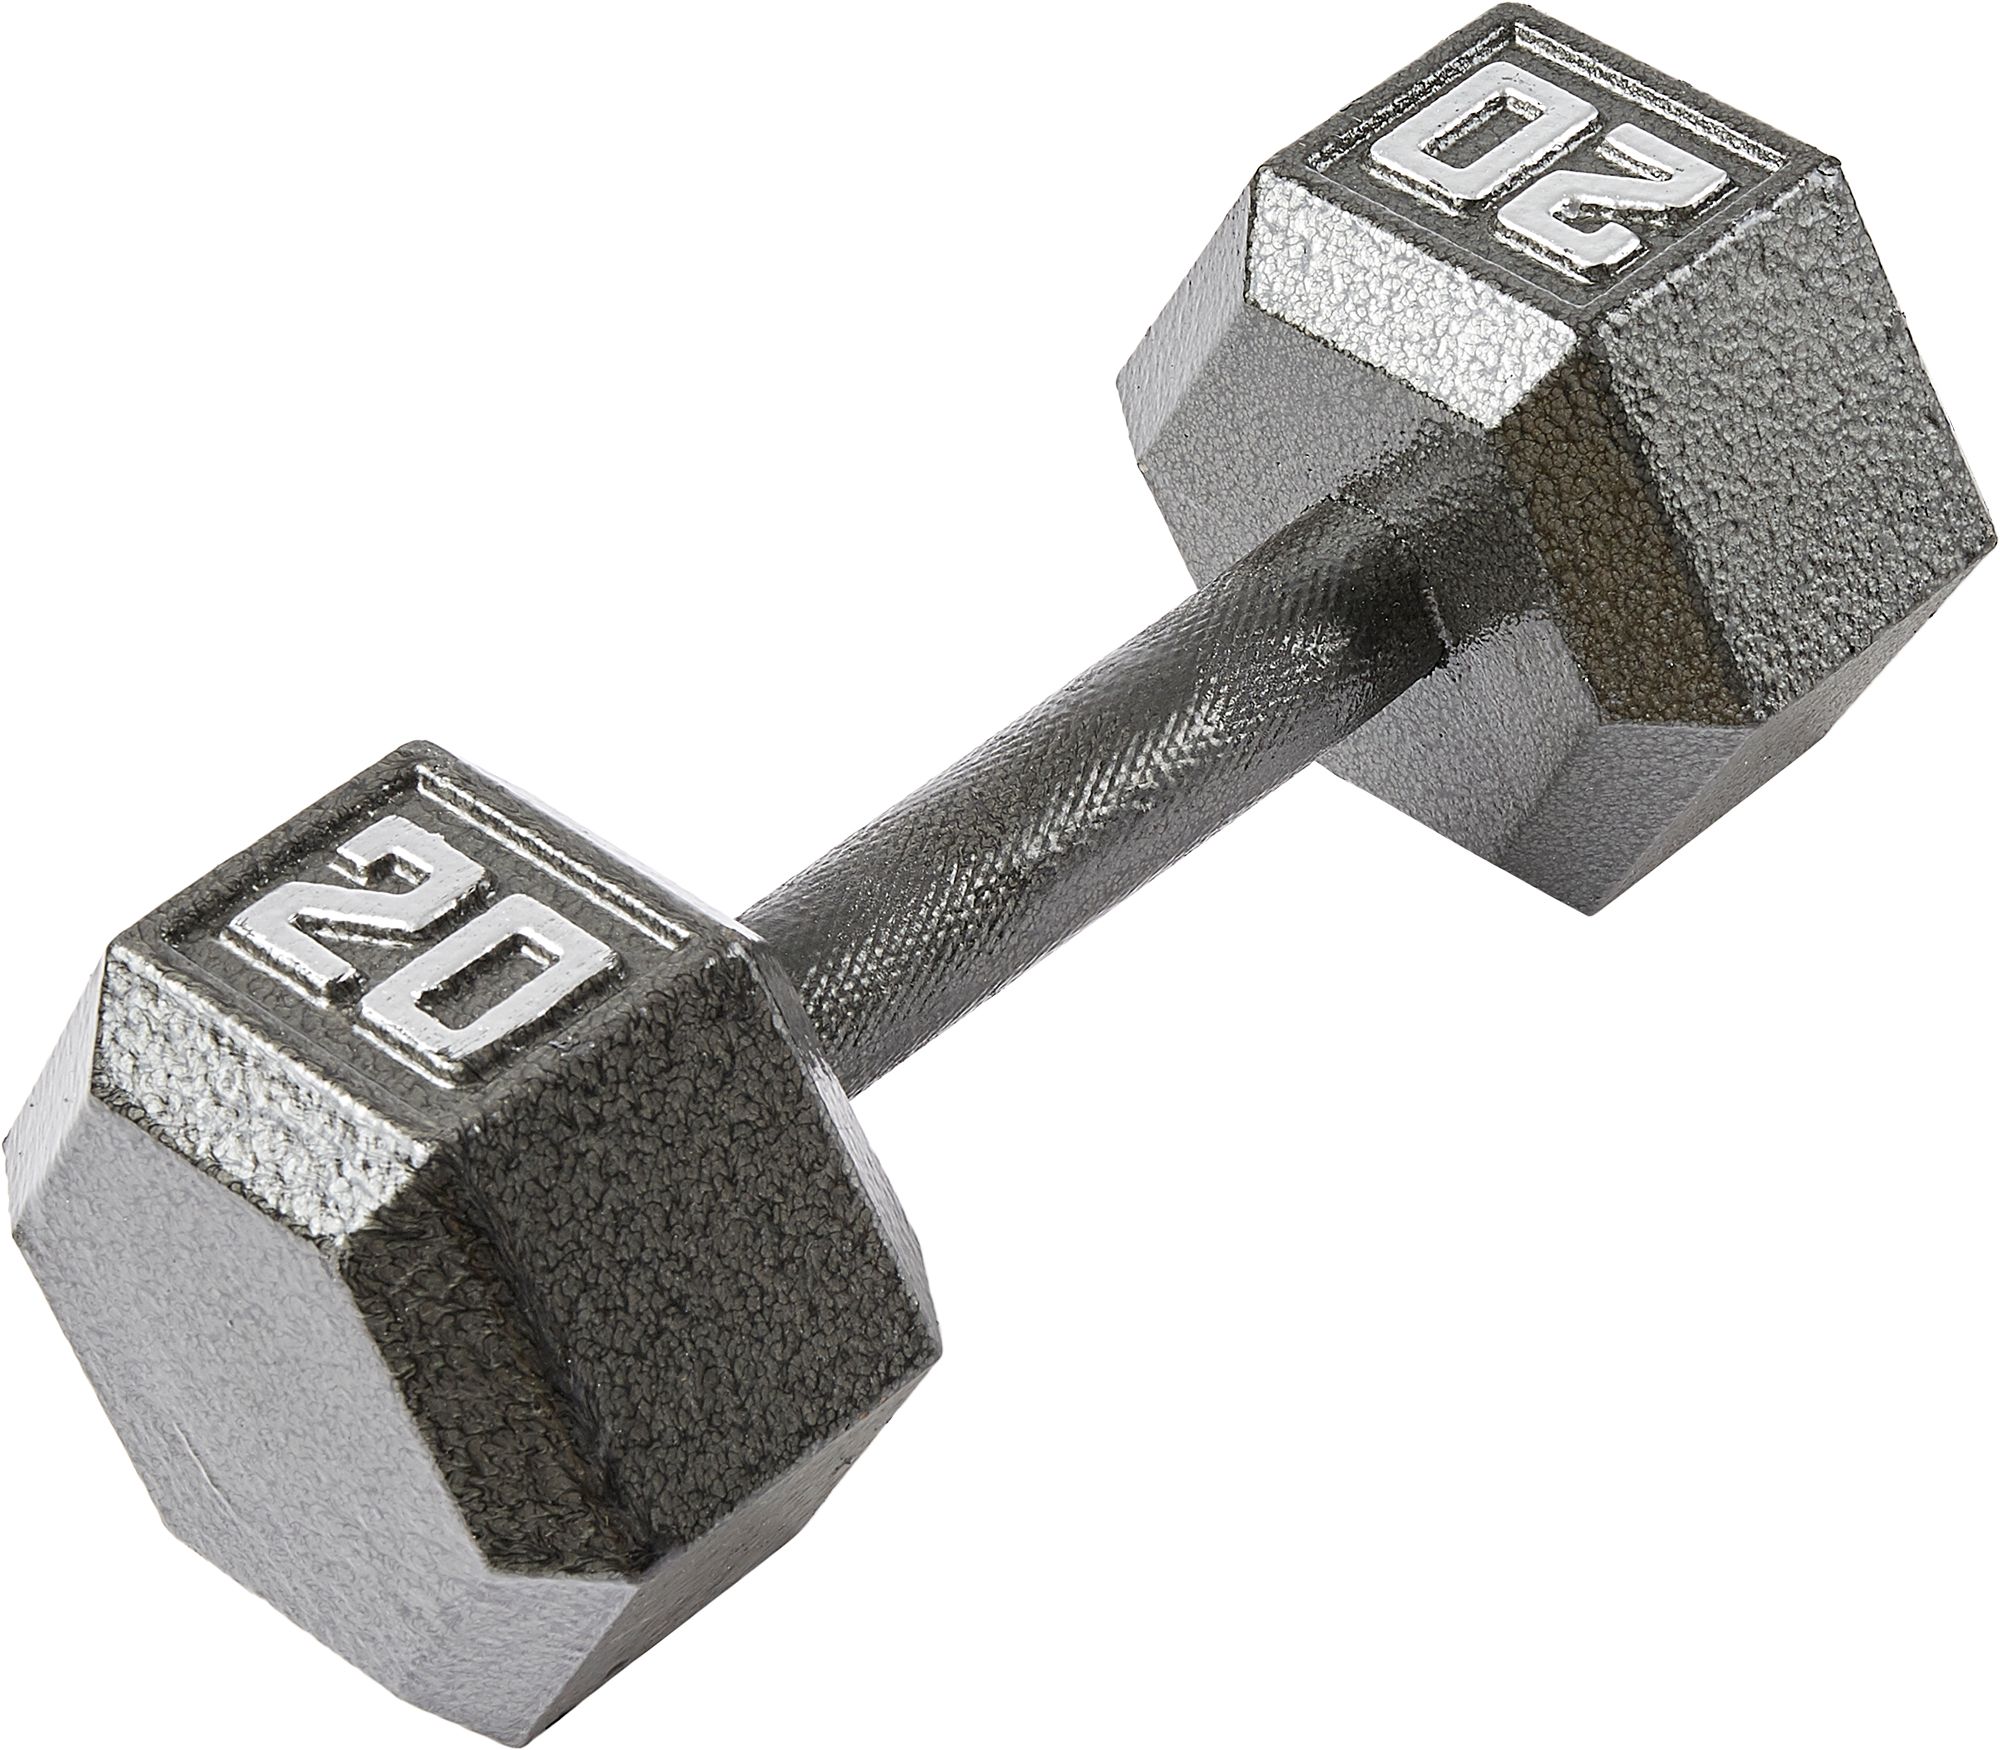 20 lb hand weights